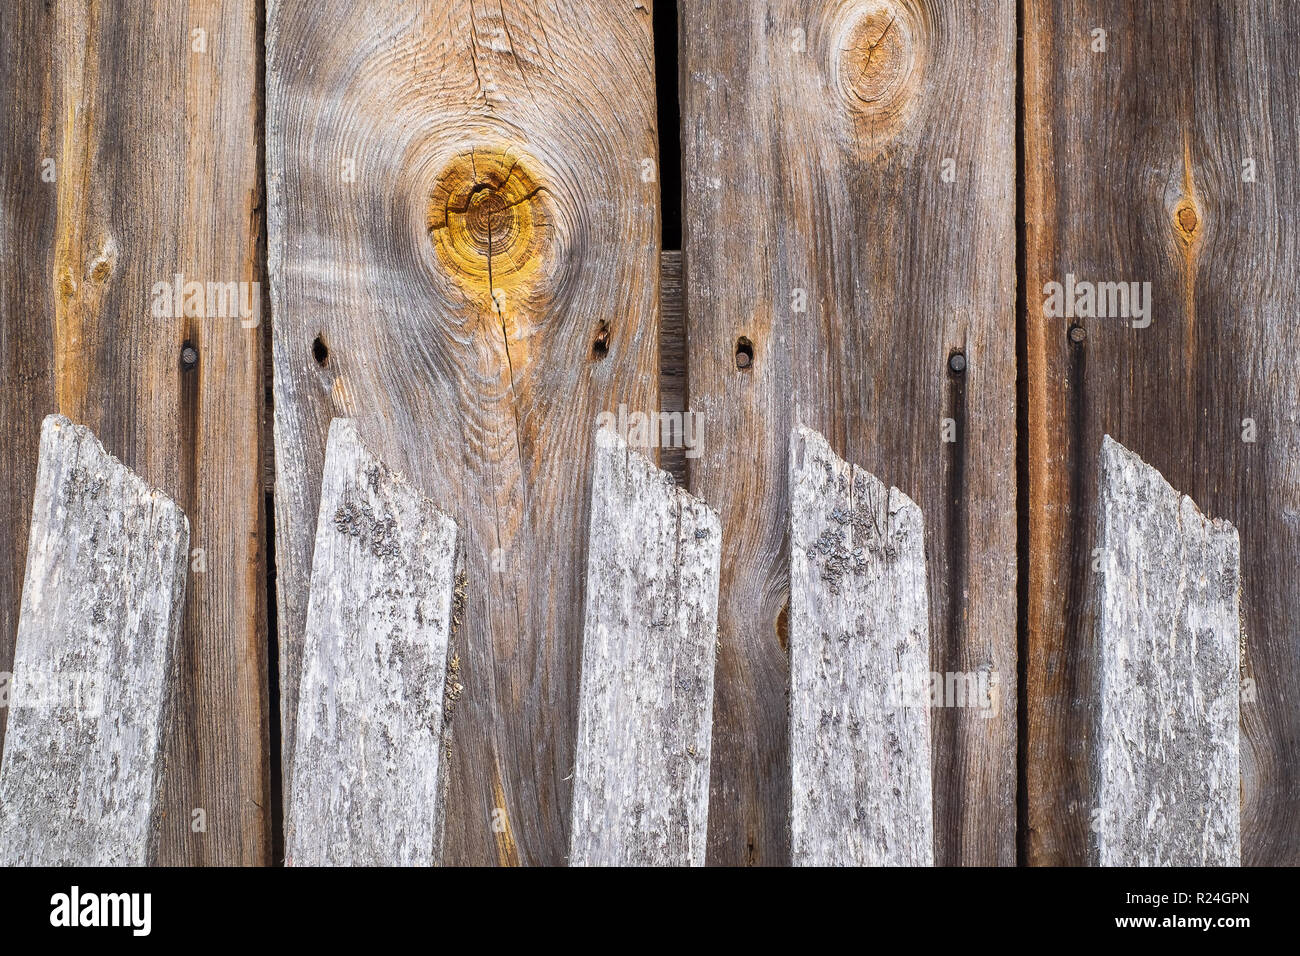 wooden fence, knot and country house wall Stock Photo